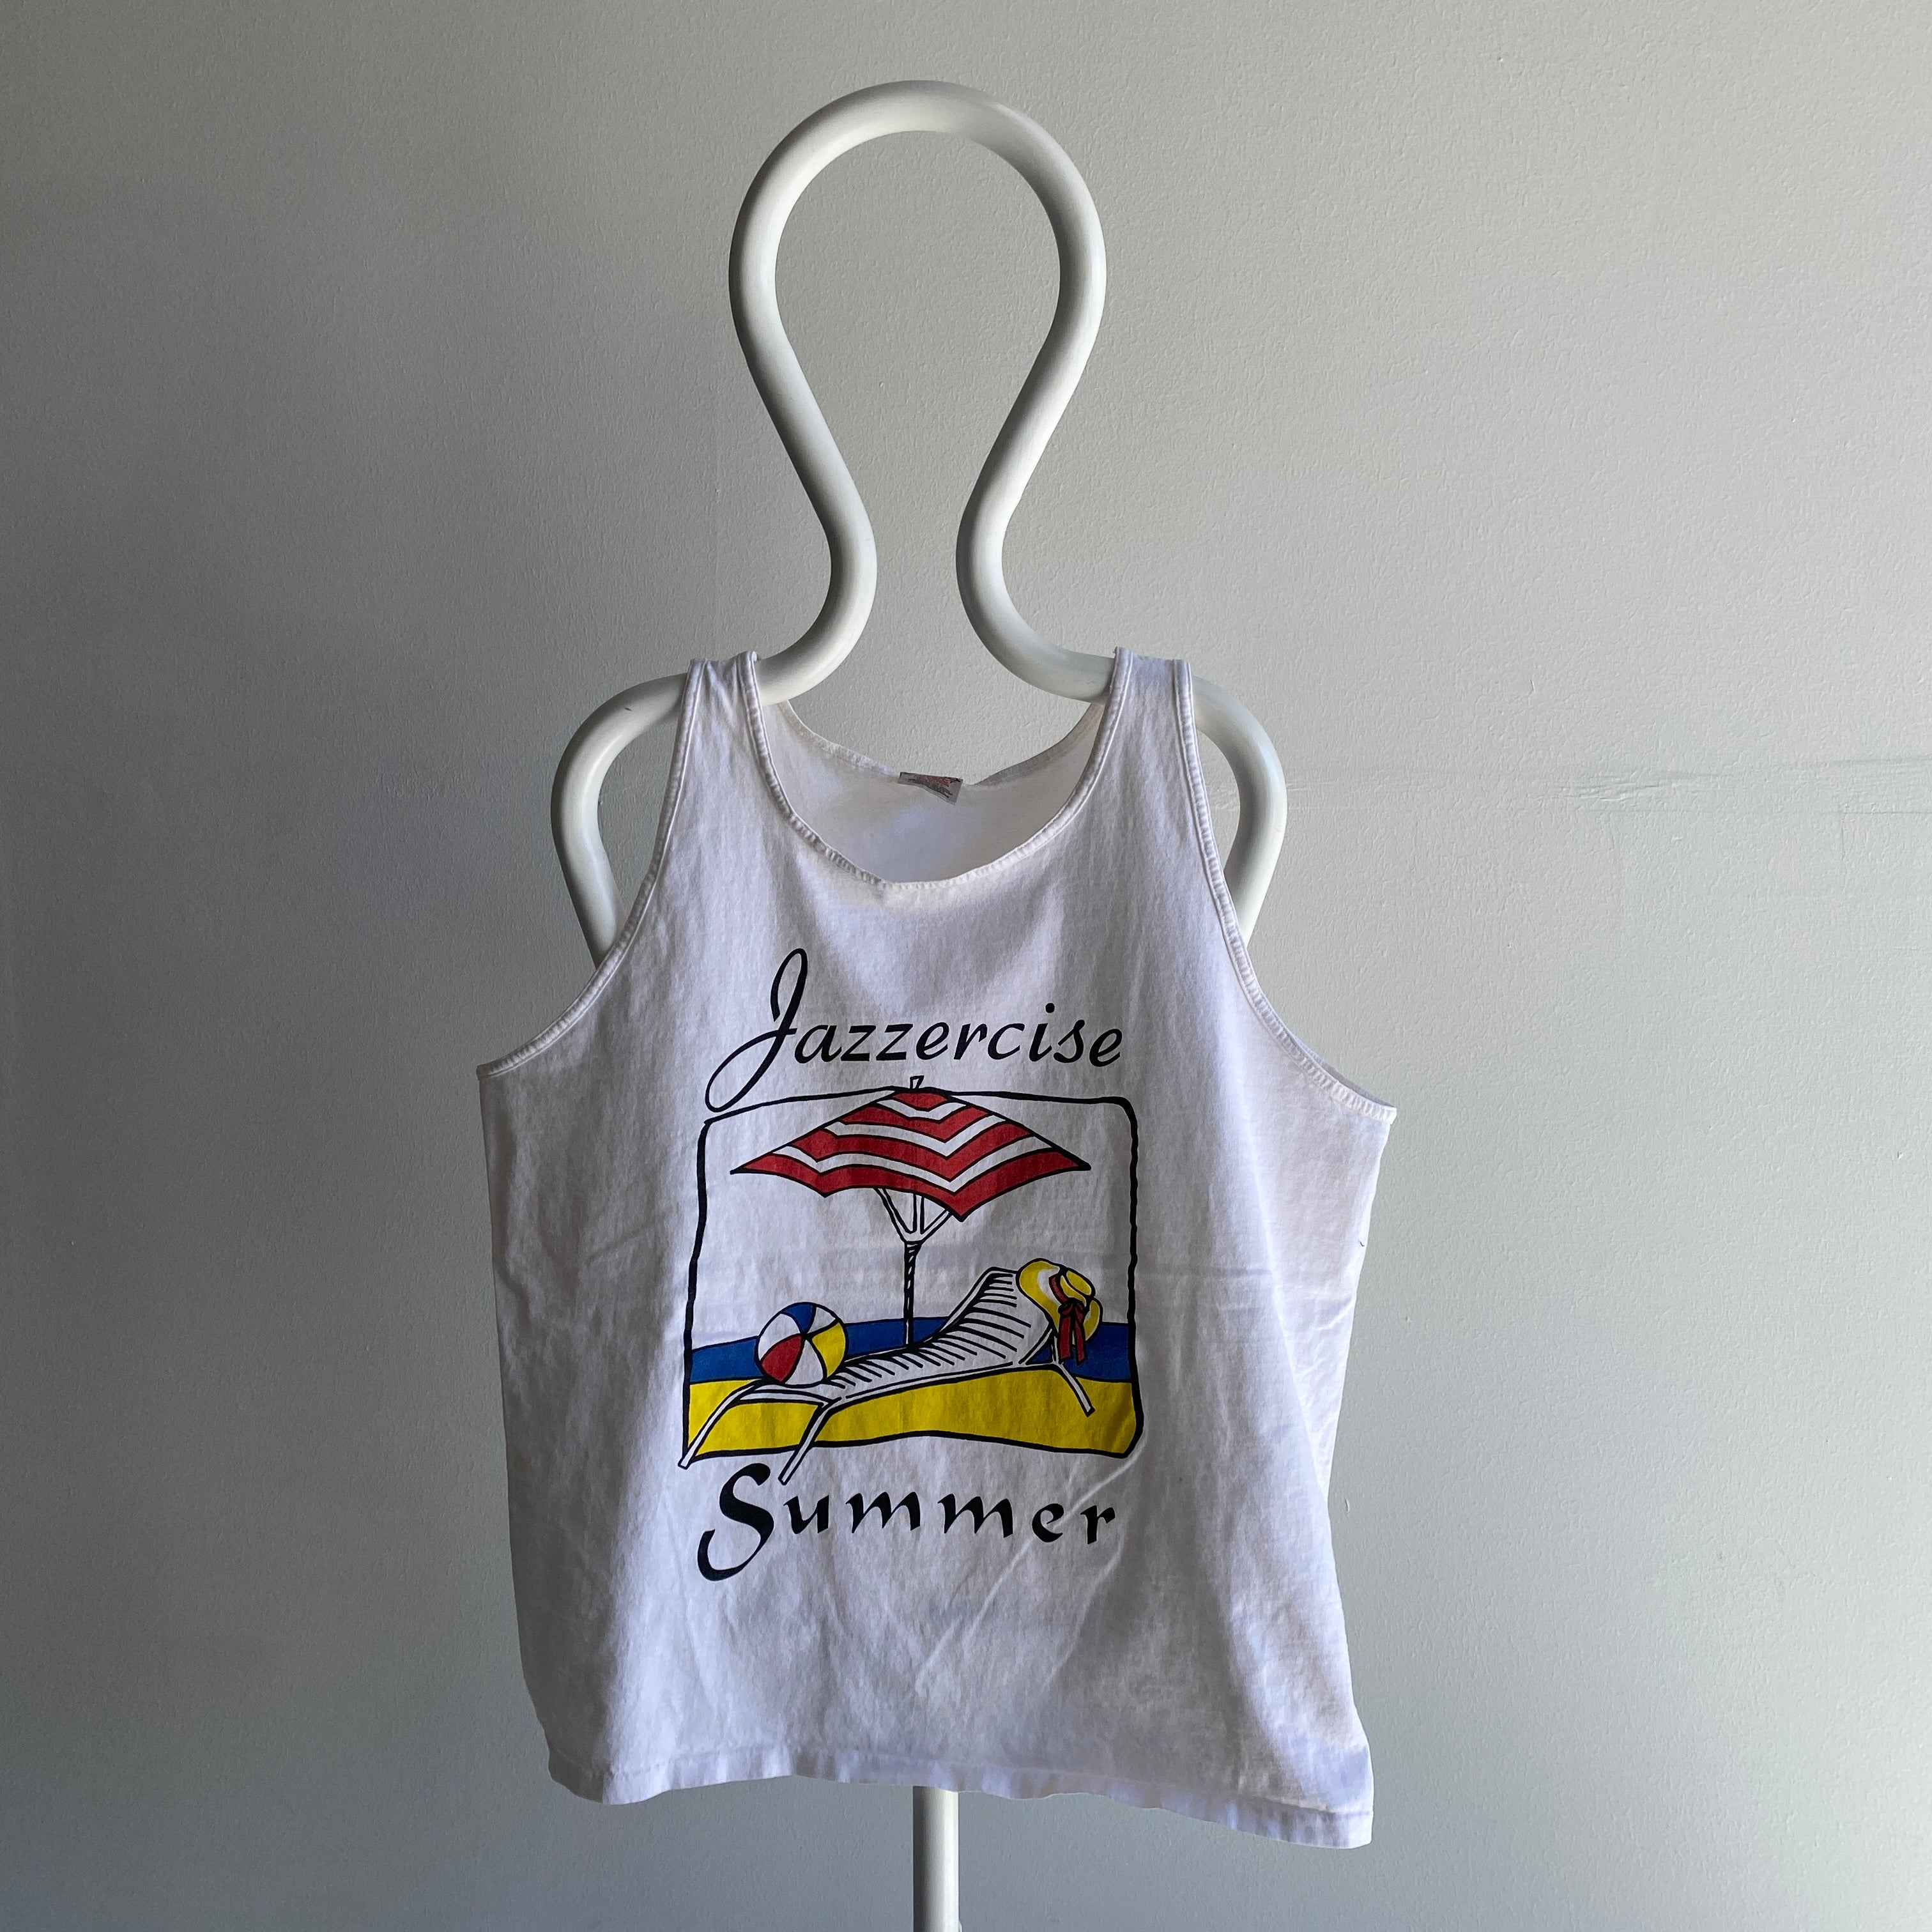 1990s Jazzercise Tank Top by Oneita - YES PLEASE!